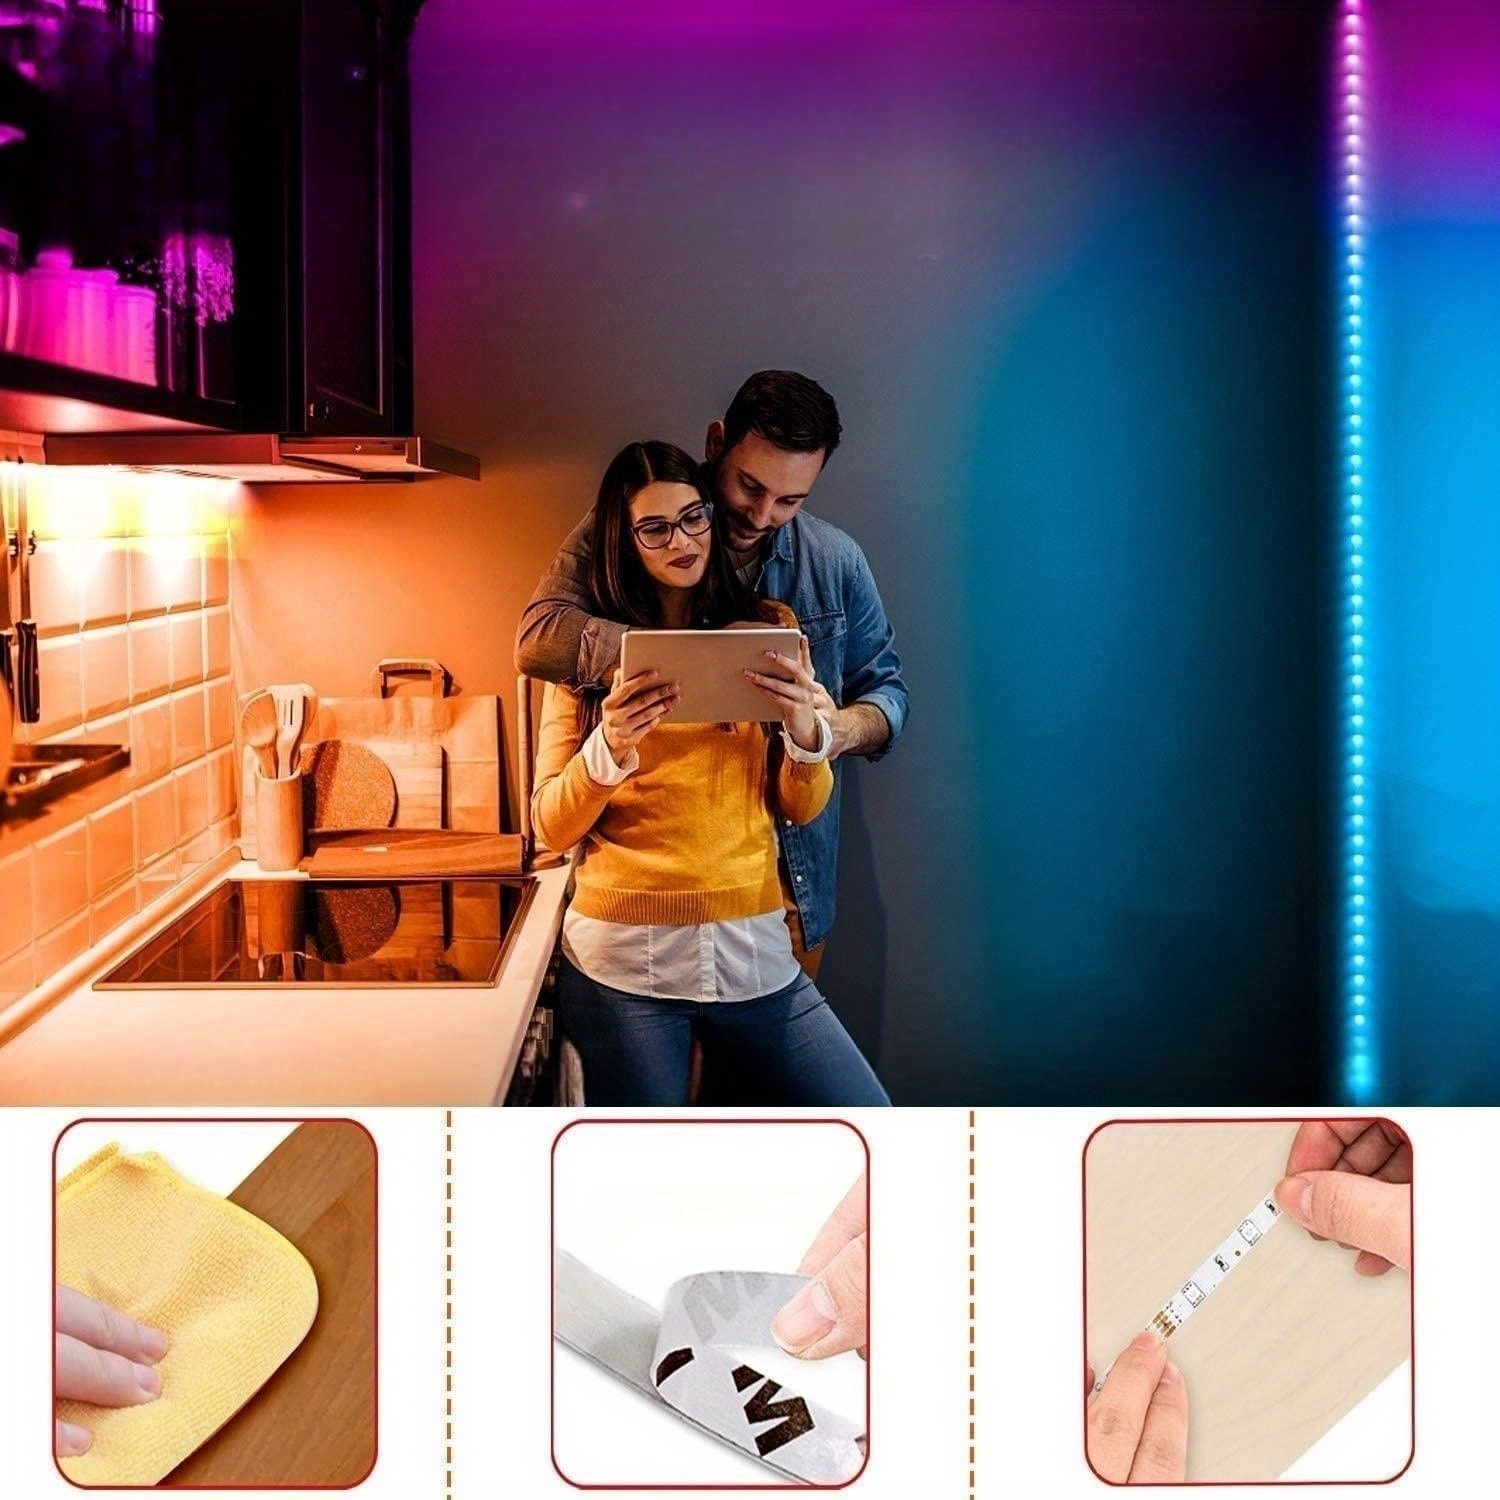 60m 200ft smart led strip light 2 rolls of 30m 100ft rgb strip light synchronized with music 44 key remote control led light used for bedroom christmas light decoration multi color 100ft deck balcony roof garden swimming pool details 0